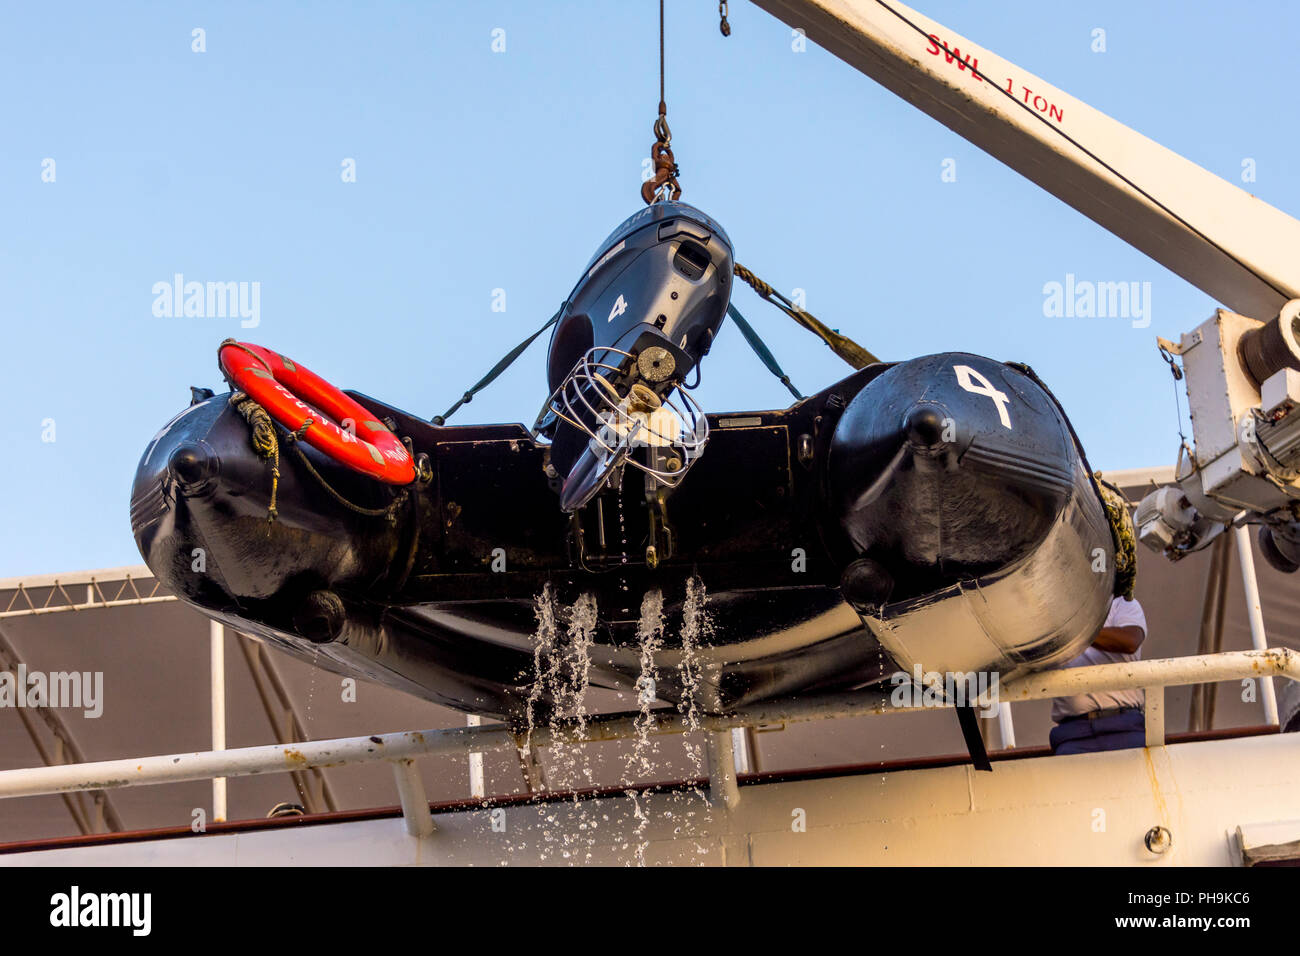 Empty inflatable boat being hoisted onboard the Lindblad National Geographic Islander in the Galapagos Islands. Stock Photo